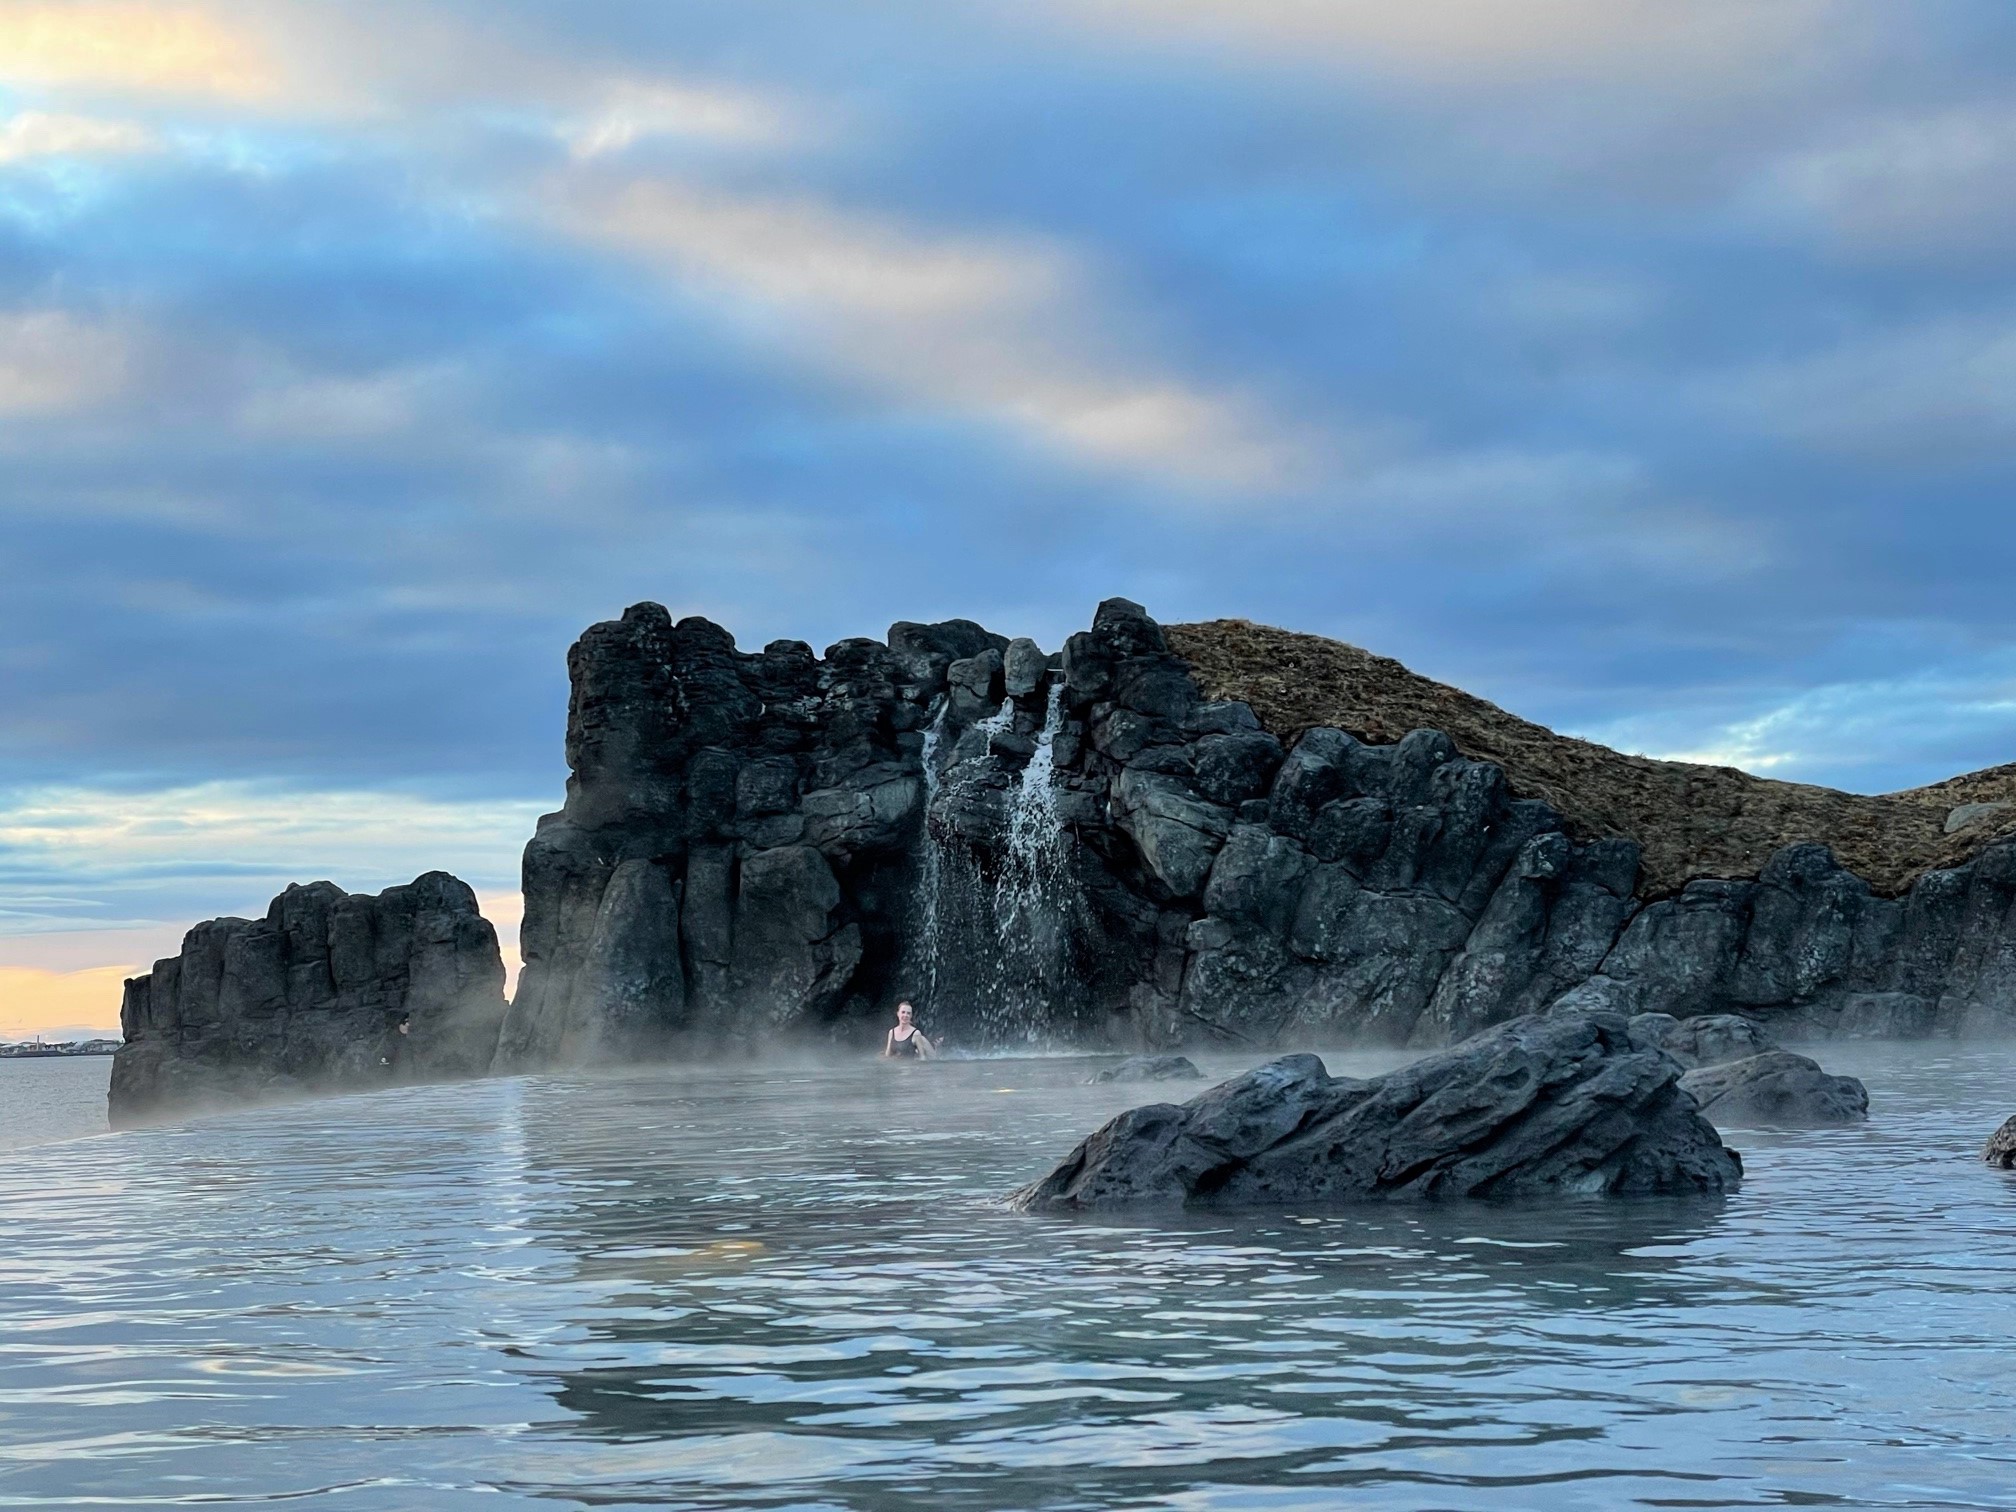 A person bathing in the Sky Lagoon in Reykjavik, pictured with water pouring over the black basalt cliffs onto themselves and into the steaming pool